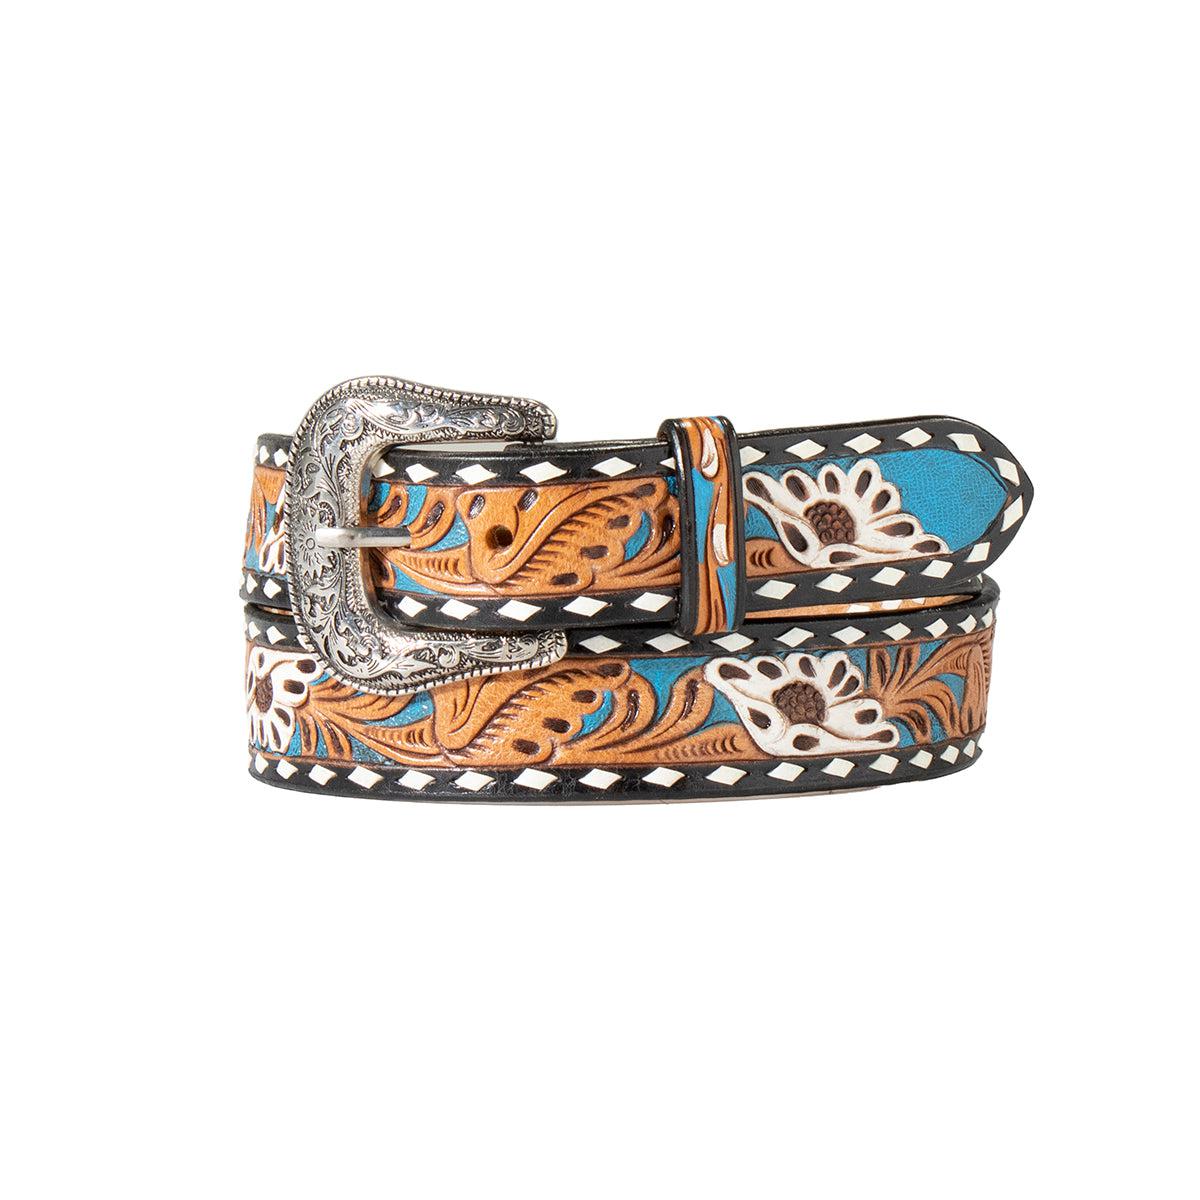 LADIES NOCONA 1 1/2 HAND TOOLED PAINTED FLORAL INLAY